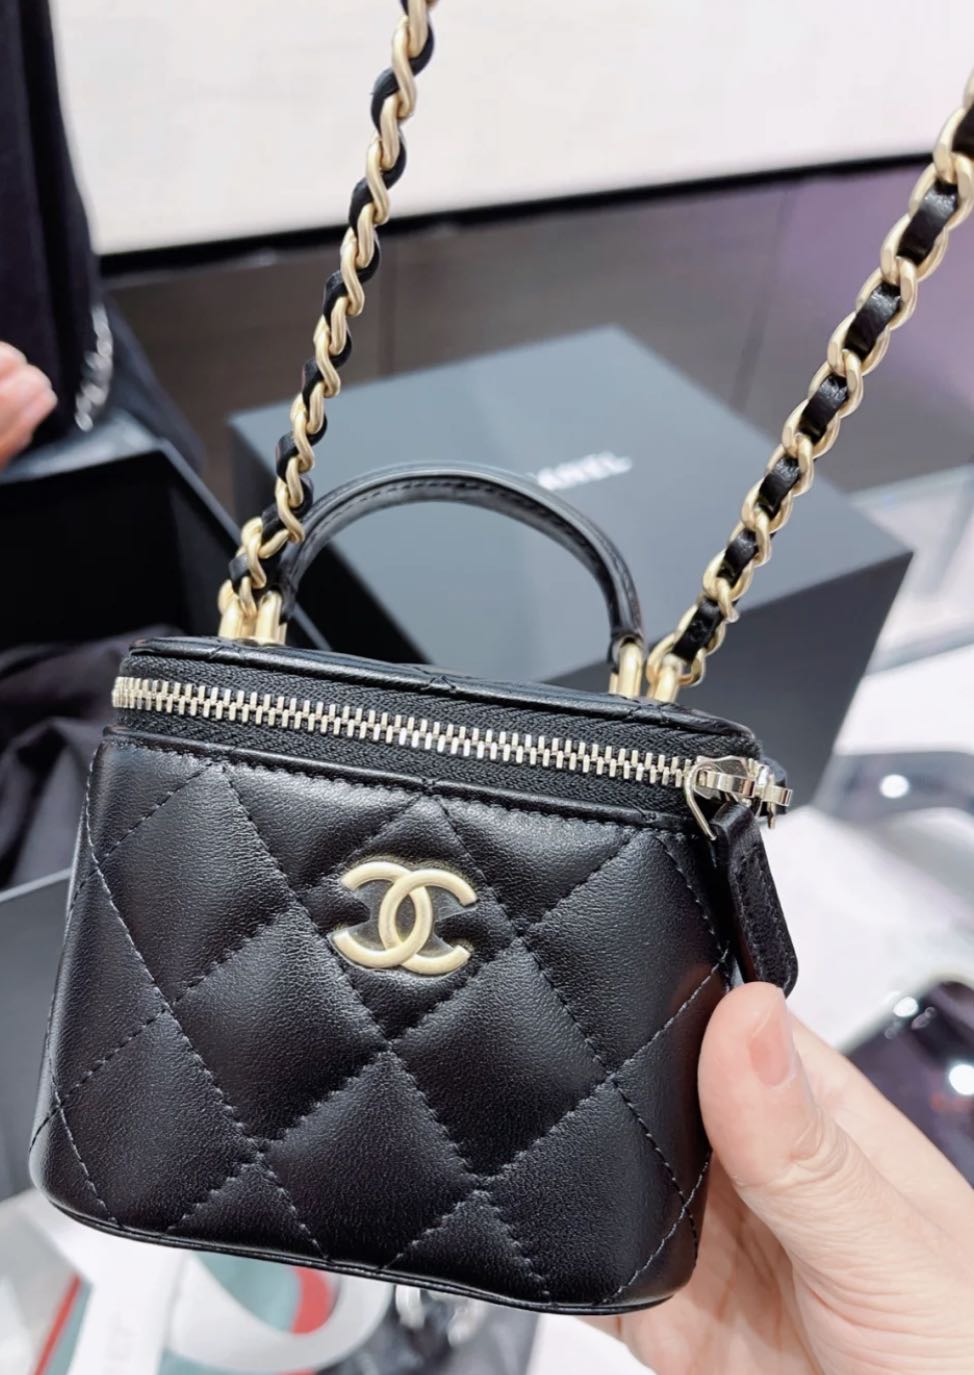 Chanel 21A TOP Handle VANITY Mini CLUTCH with Chains Black Lambskin  COMPARISONS Classic #luxurypl38 